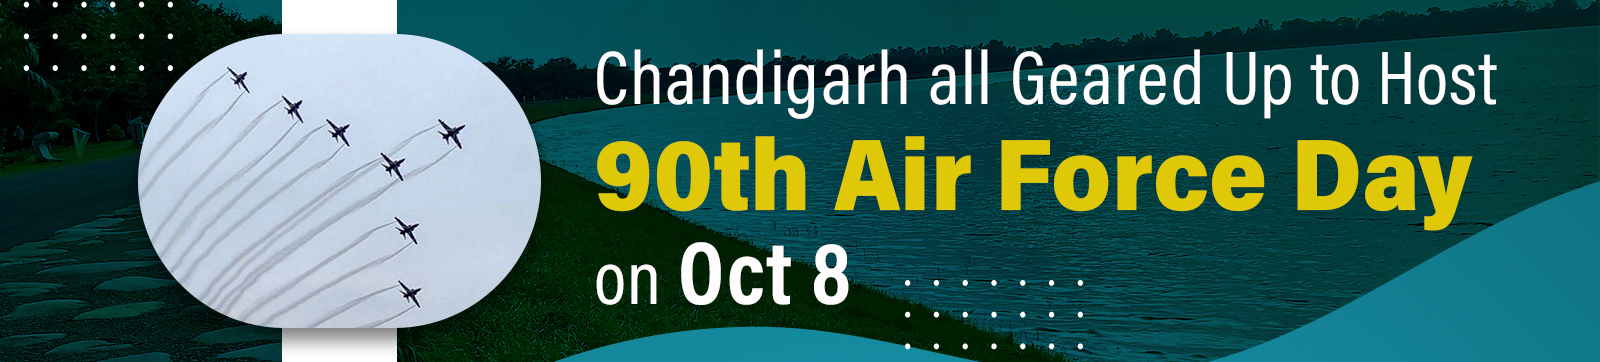 Chandigarh all Geared Up to Host 90th Air Force Day on Oct 8